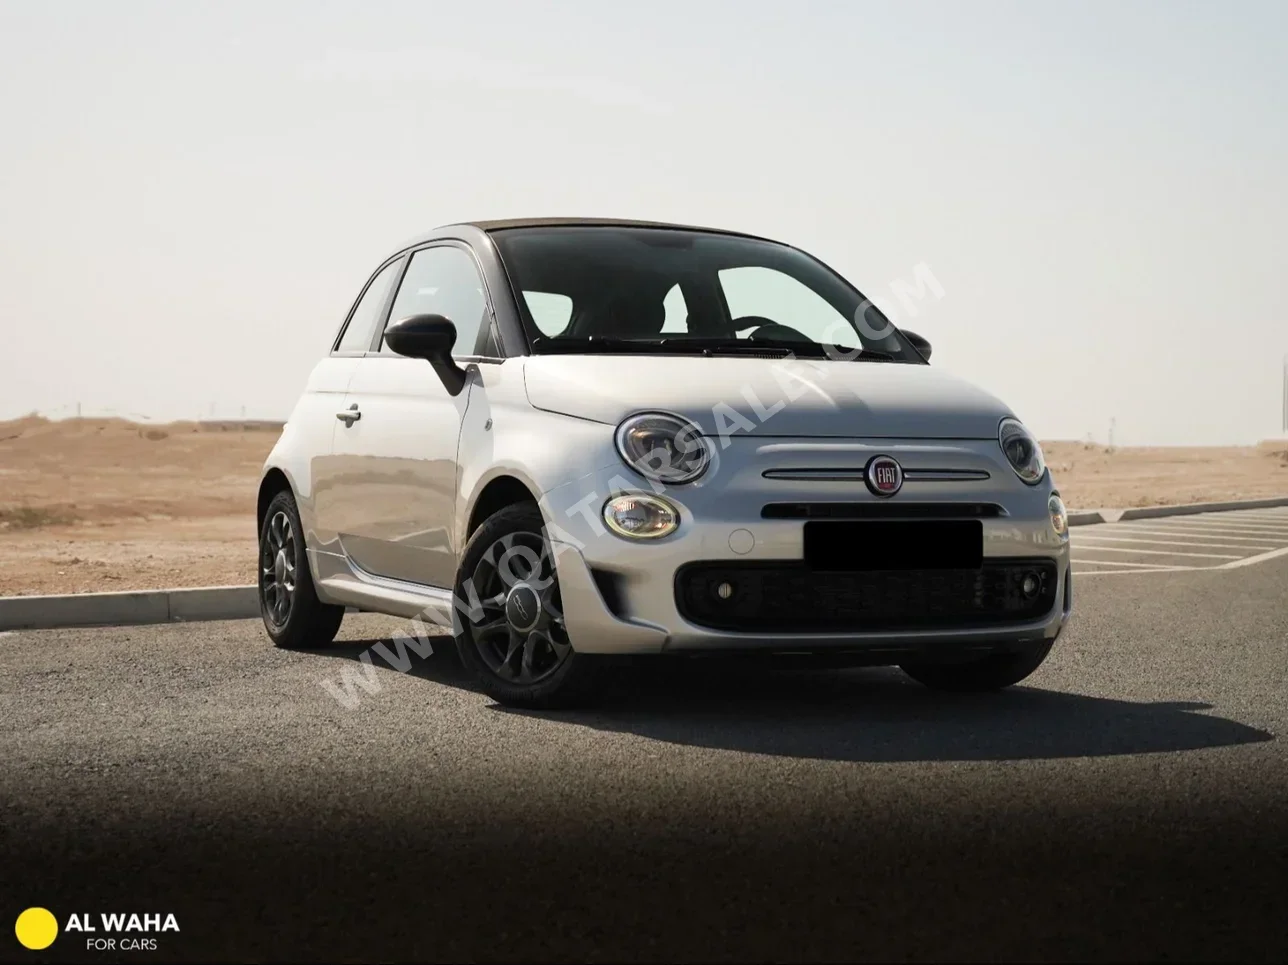 Fiat  500  2022  Automatic  23,000 Km  4 Cylinder  Front Wheel Drive (FWD)  Hatchback  Silver  With Warranty